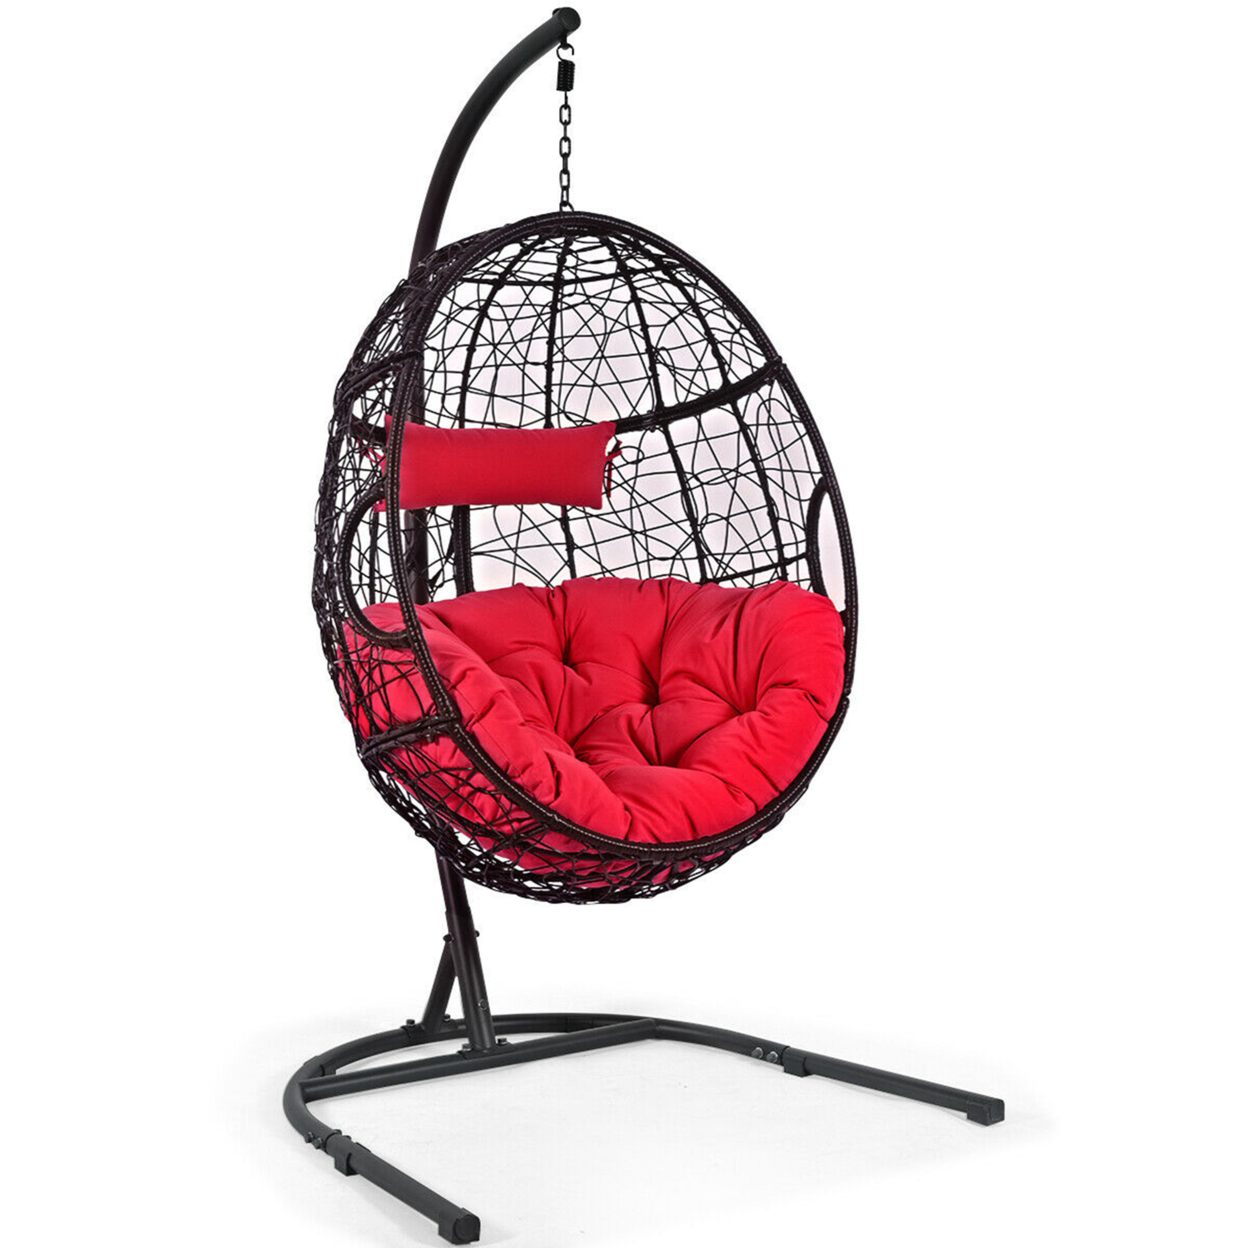 Hanging Hammock Chair Egg Swing Chair W/ Red Cushion Pillow Stand